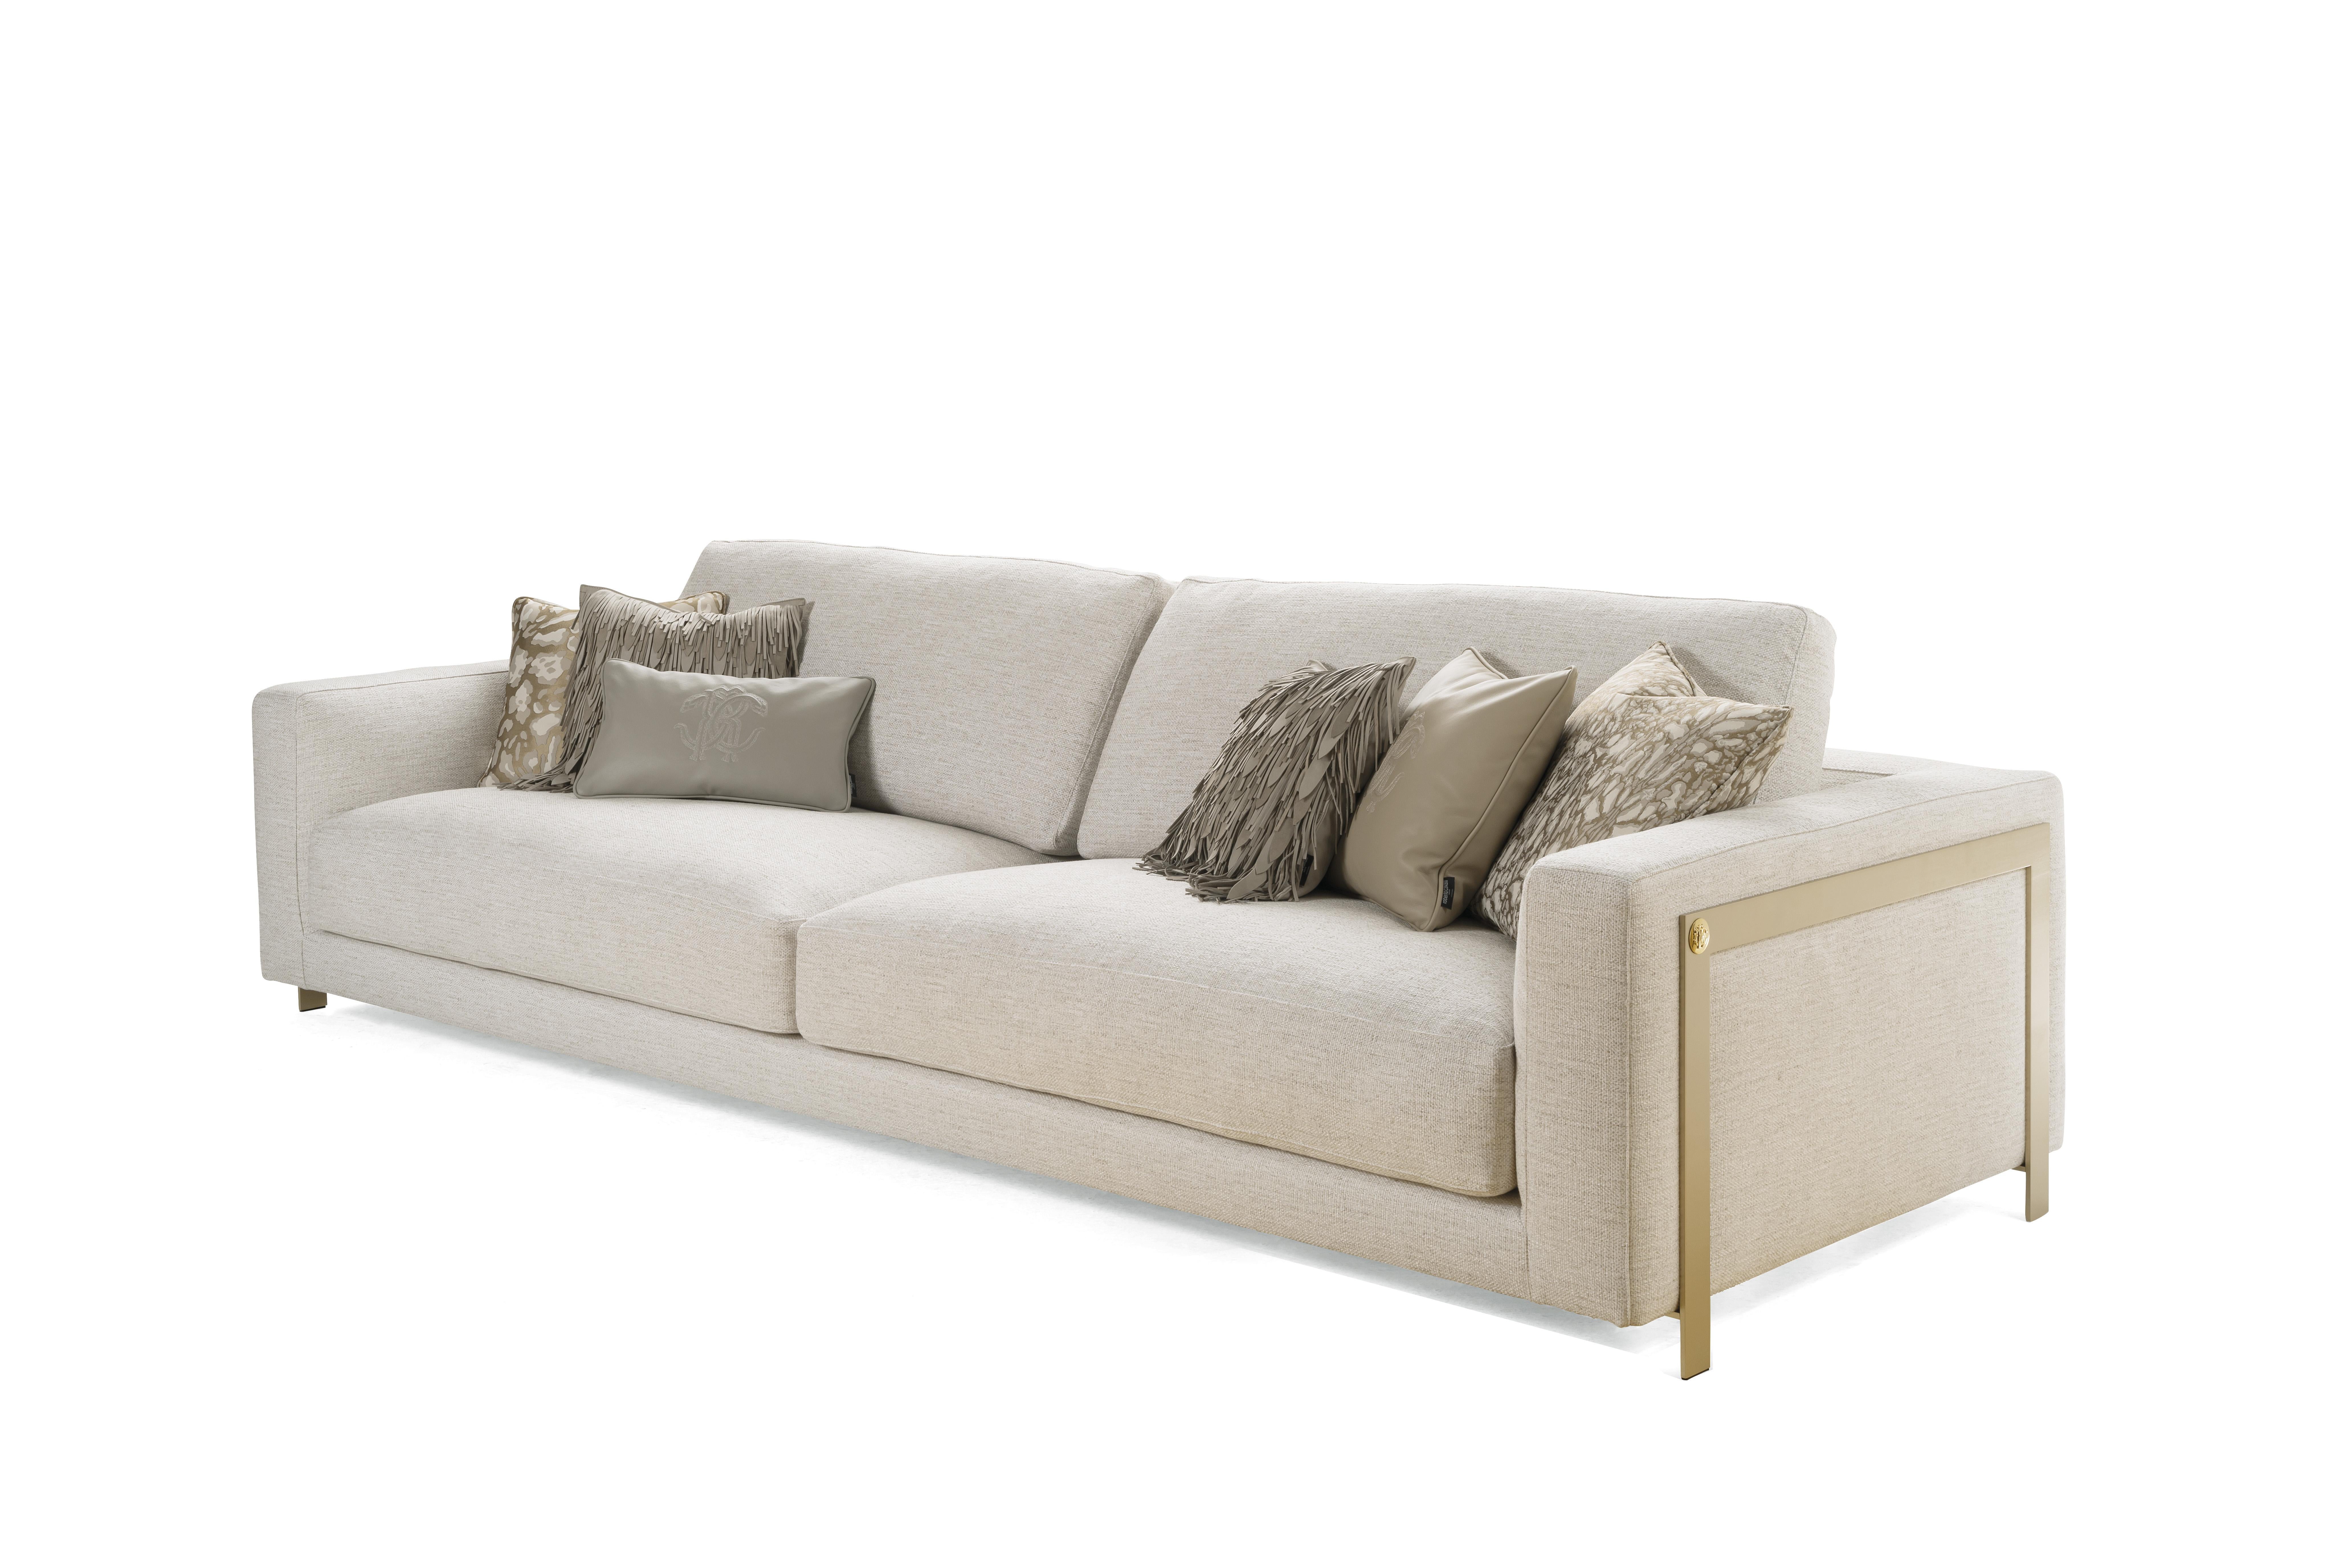 A design sofa that offers the cozy sensation of inviting warmth and comfortable softness raised off the floor on thin gold finished legs.
Manhattan 3-seater sofa with structure in solid poplar wood and expansive polyurethane foam. Upholstery in